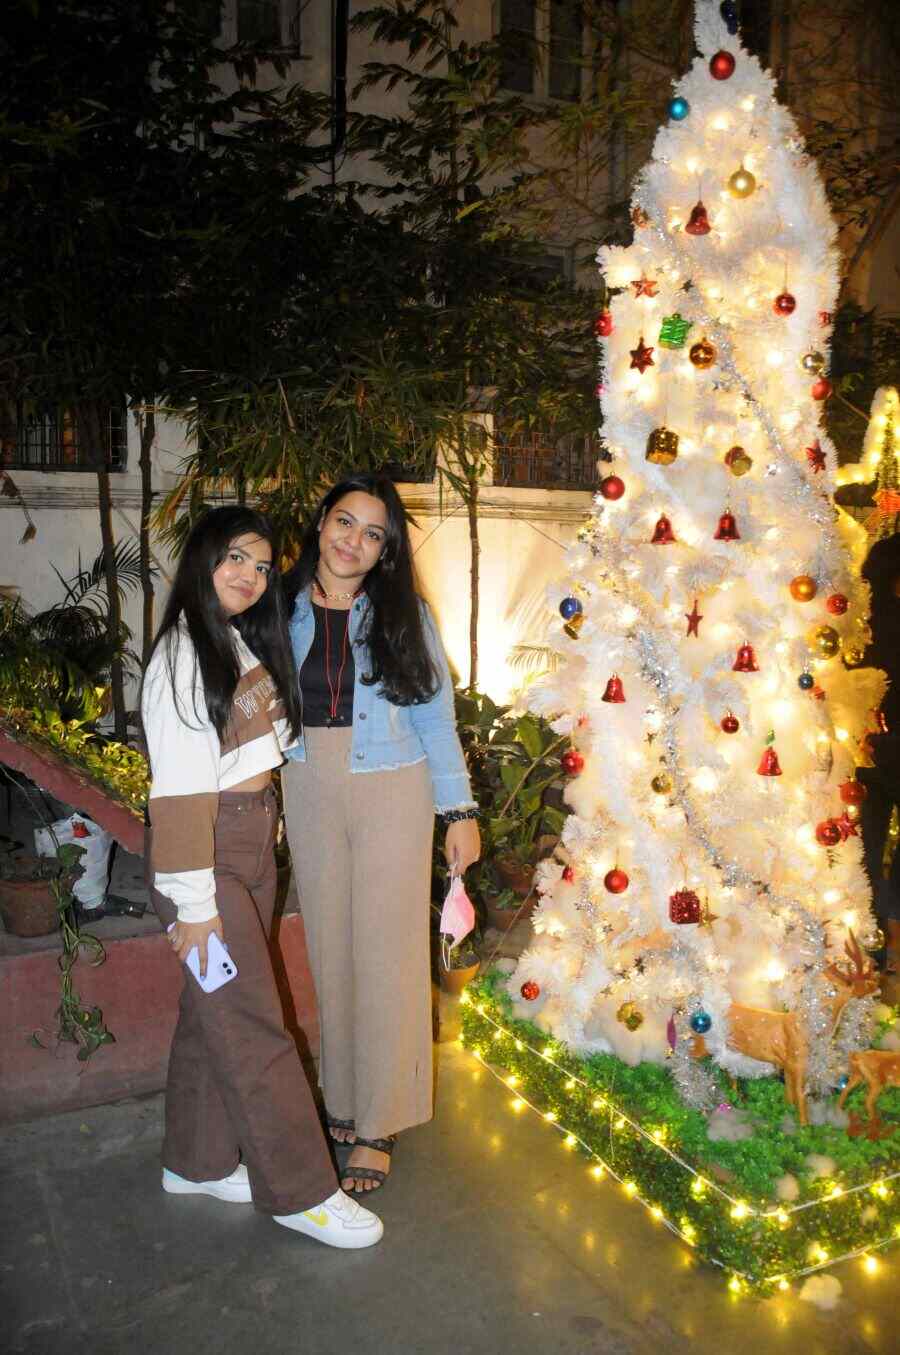 School friends Ronica Balmiki (L) and Debanjali Roy Choudhury pose in front of the unique Christmas tree at Roastery Coffee House while waiting for a table